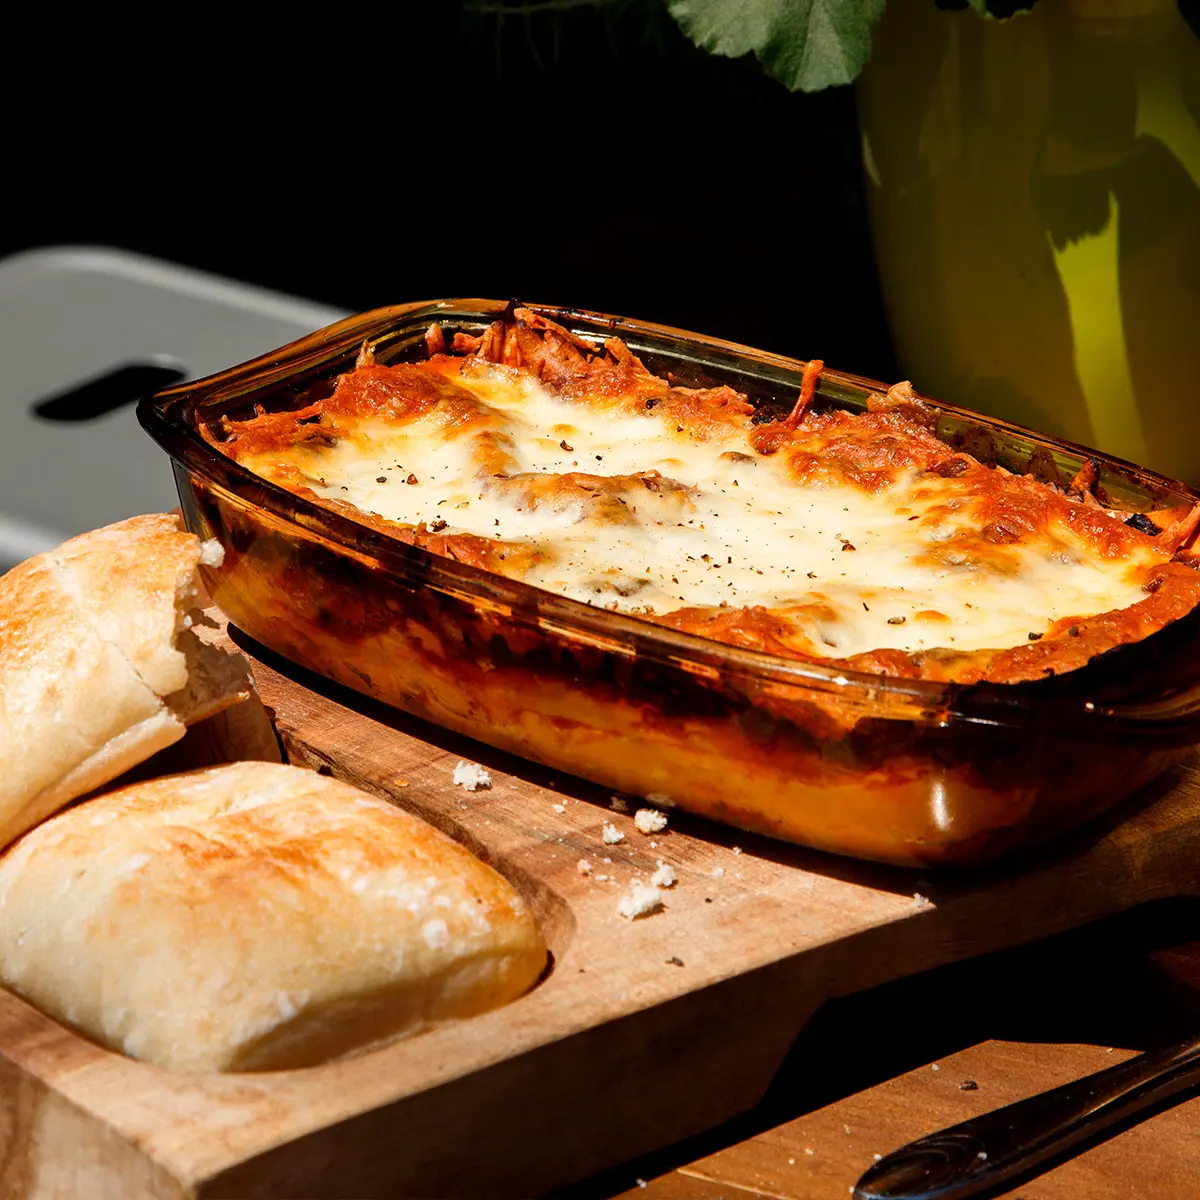 Lasagna with cheese and meat